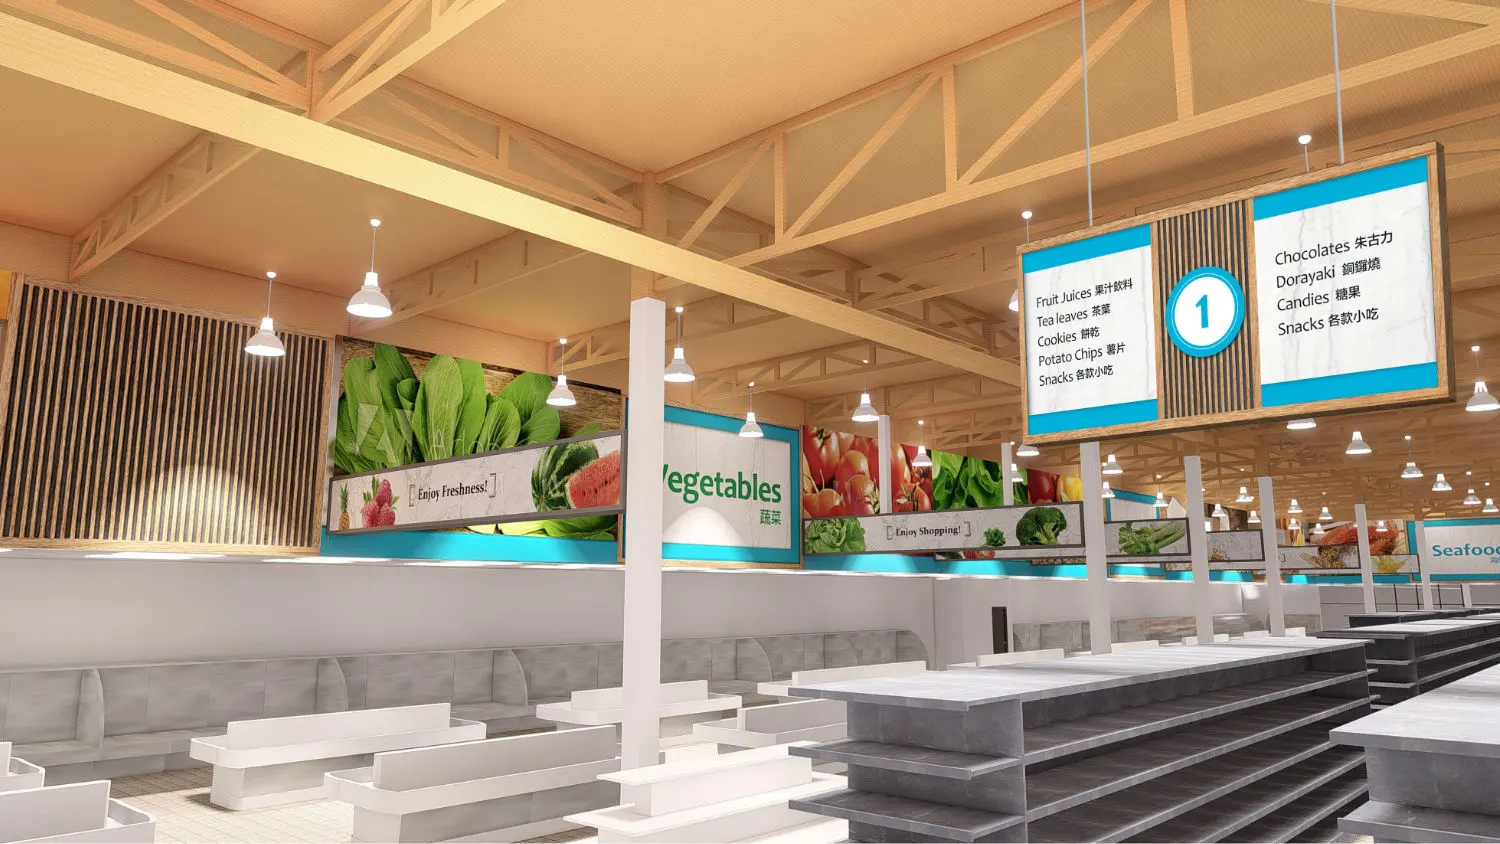 Interior design project for Foody Mart 豐泰超市. Designed 3D rendering with aisle signages